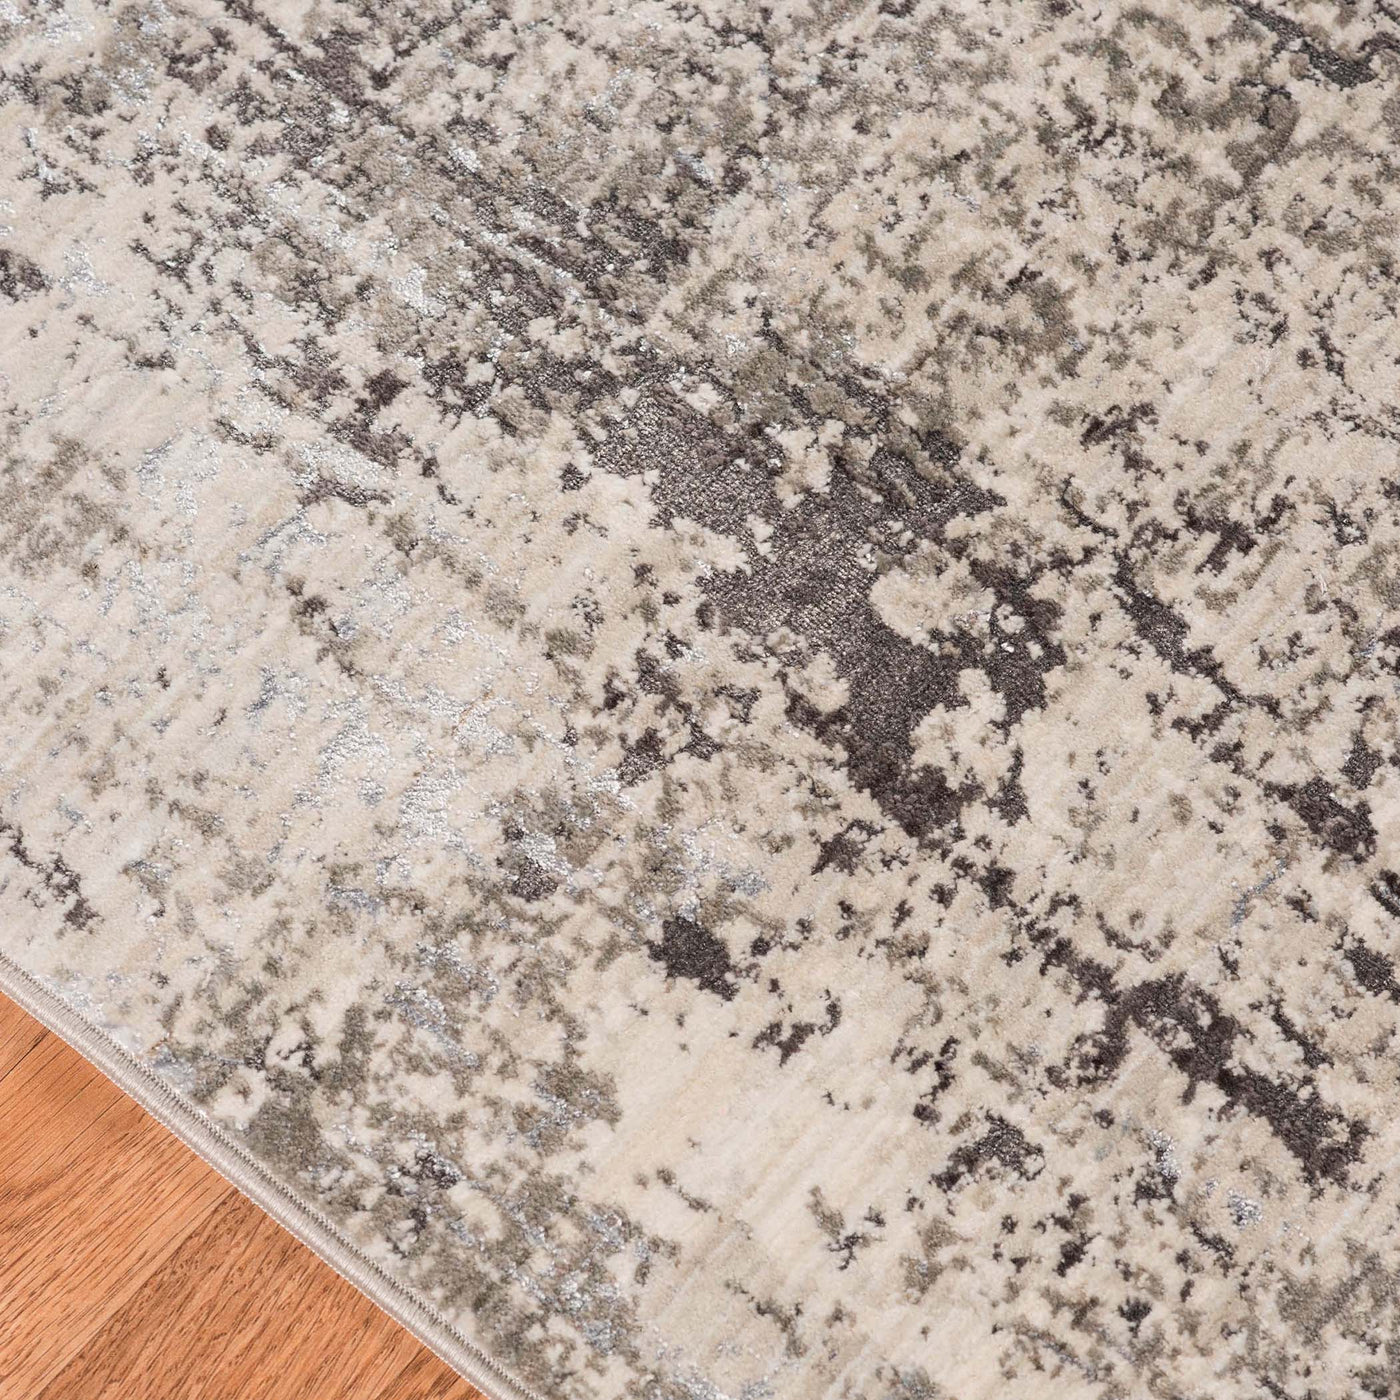 This Power Loomed Rug Features An Abstract Design In Tones Of Polyester Charcoal, Ivory, Light Gray, And Silver.